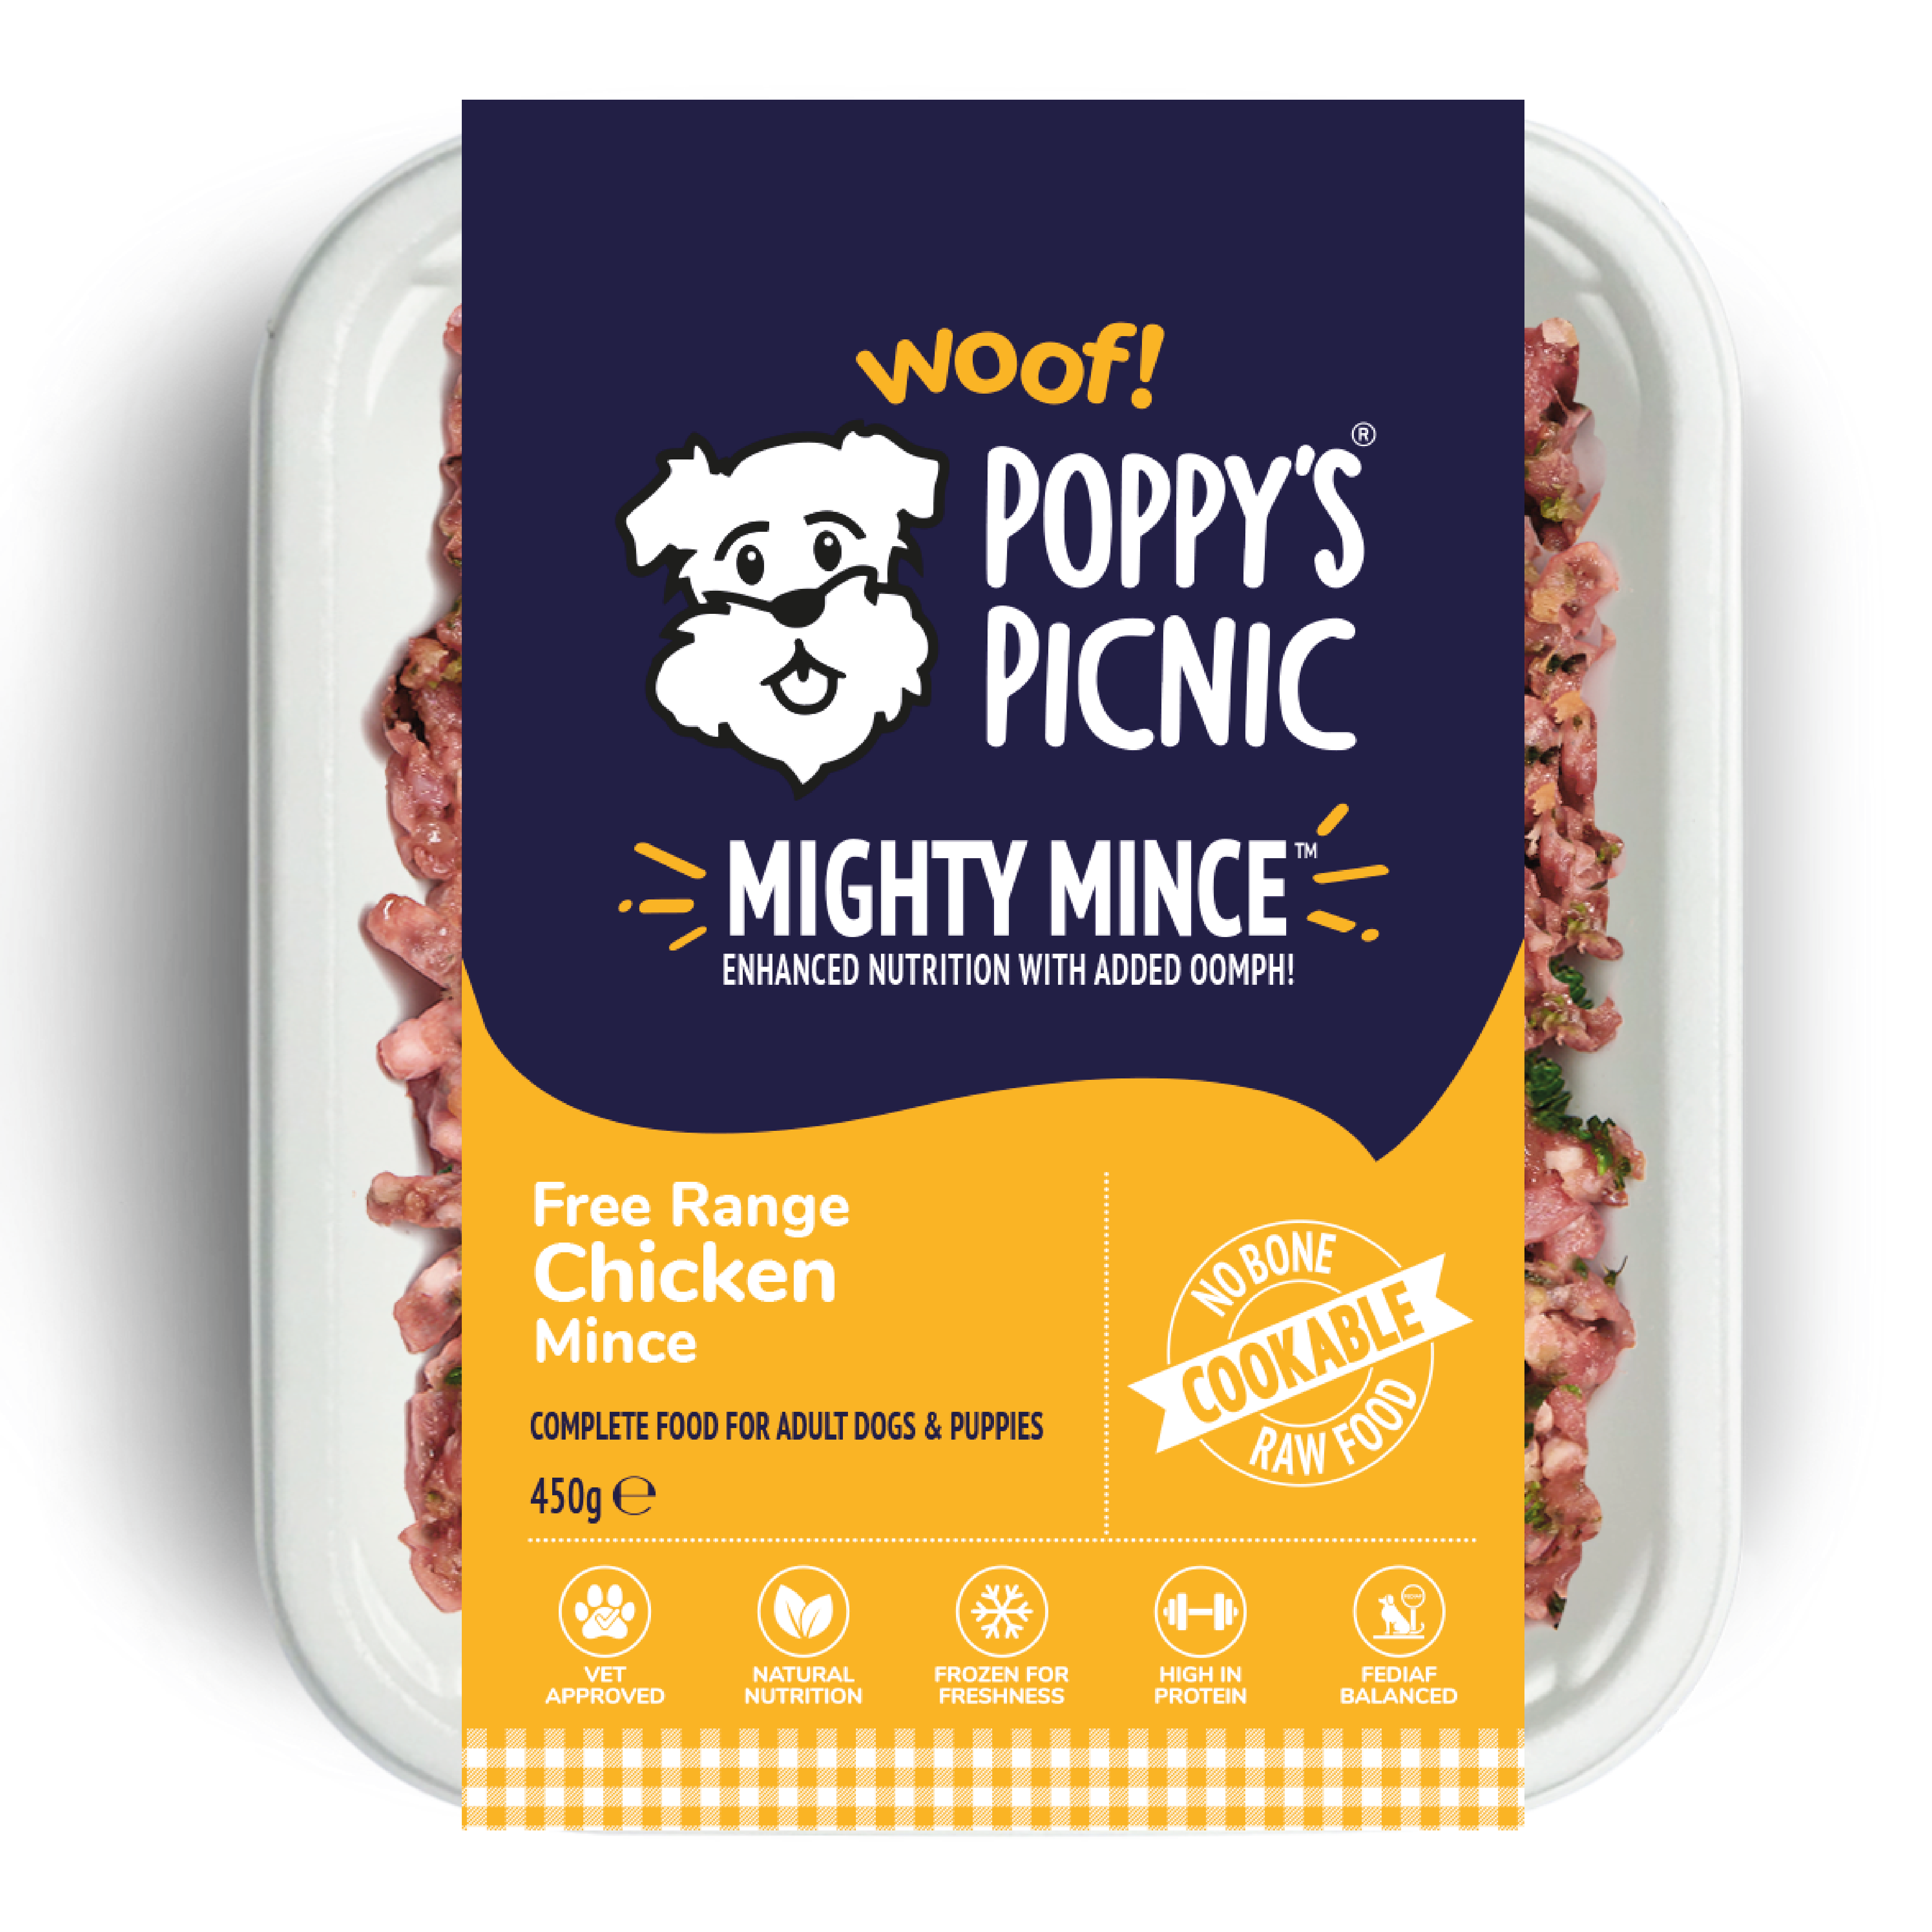 MIGHTY MINCE Chicken Box of 24